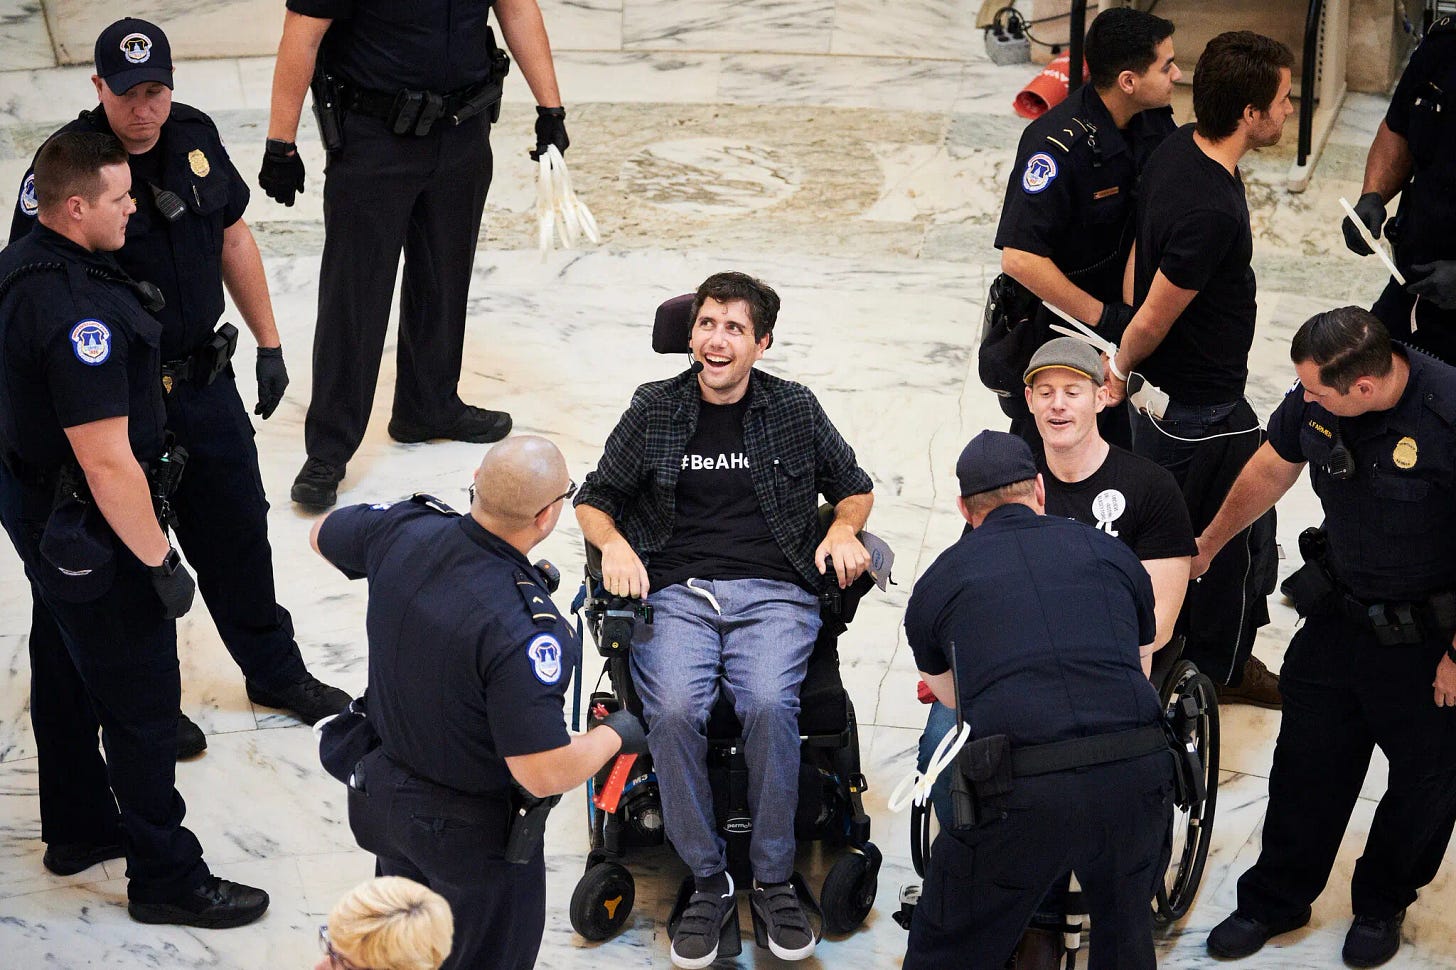 Mr. Barkan, photographed from above, is smiling as he sits in a wheelchair beside another protester in a wheelchair as police officers surround them. 